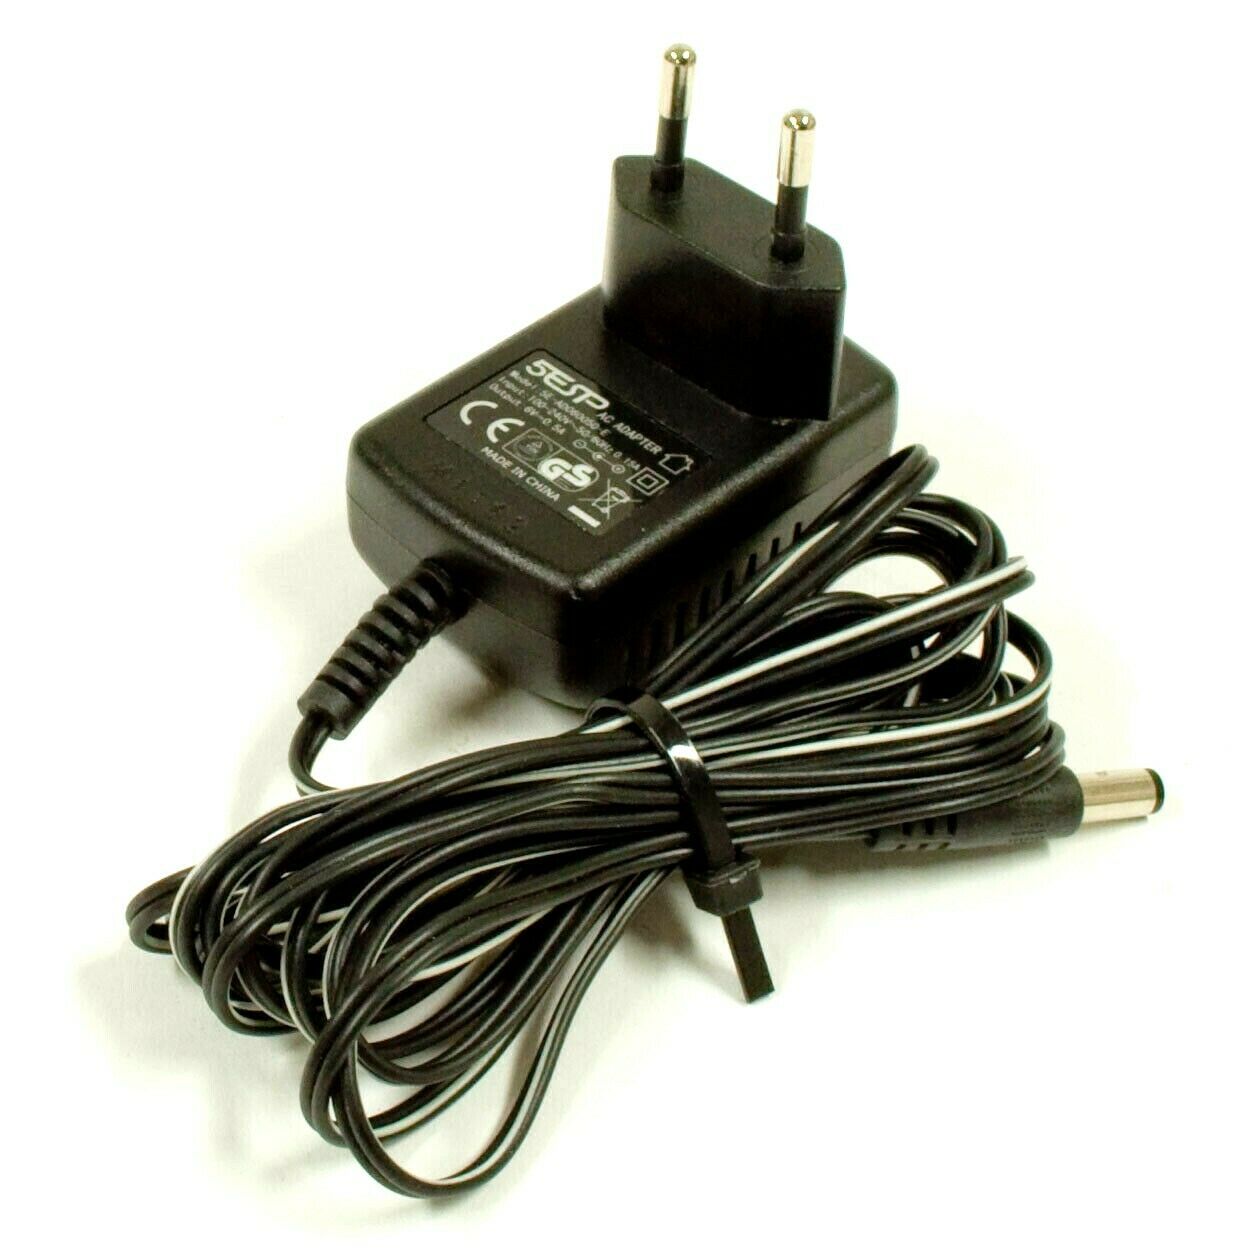 Kulikee Power Supply Adapter Unit JQS0062A-U060050 6V 0.5A Type: Adapter Features: new MPN: JQS0062A-U060050 Outpu - Click Image to Close